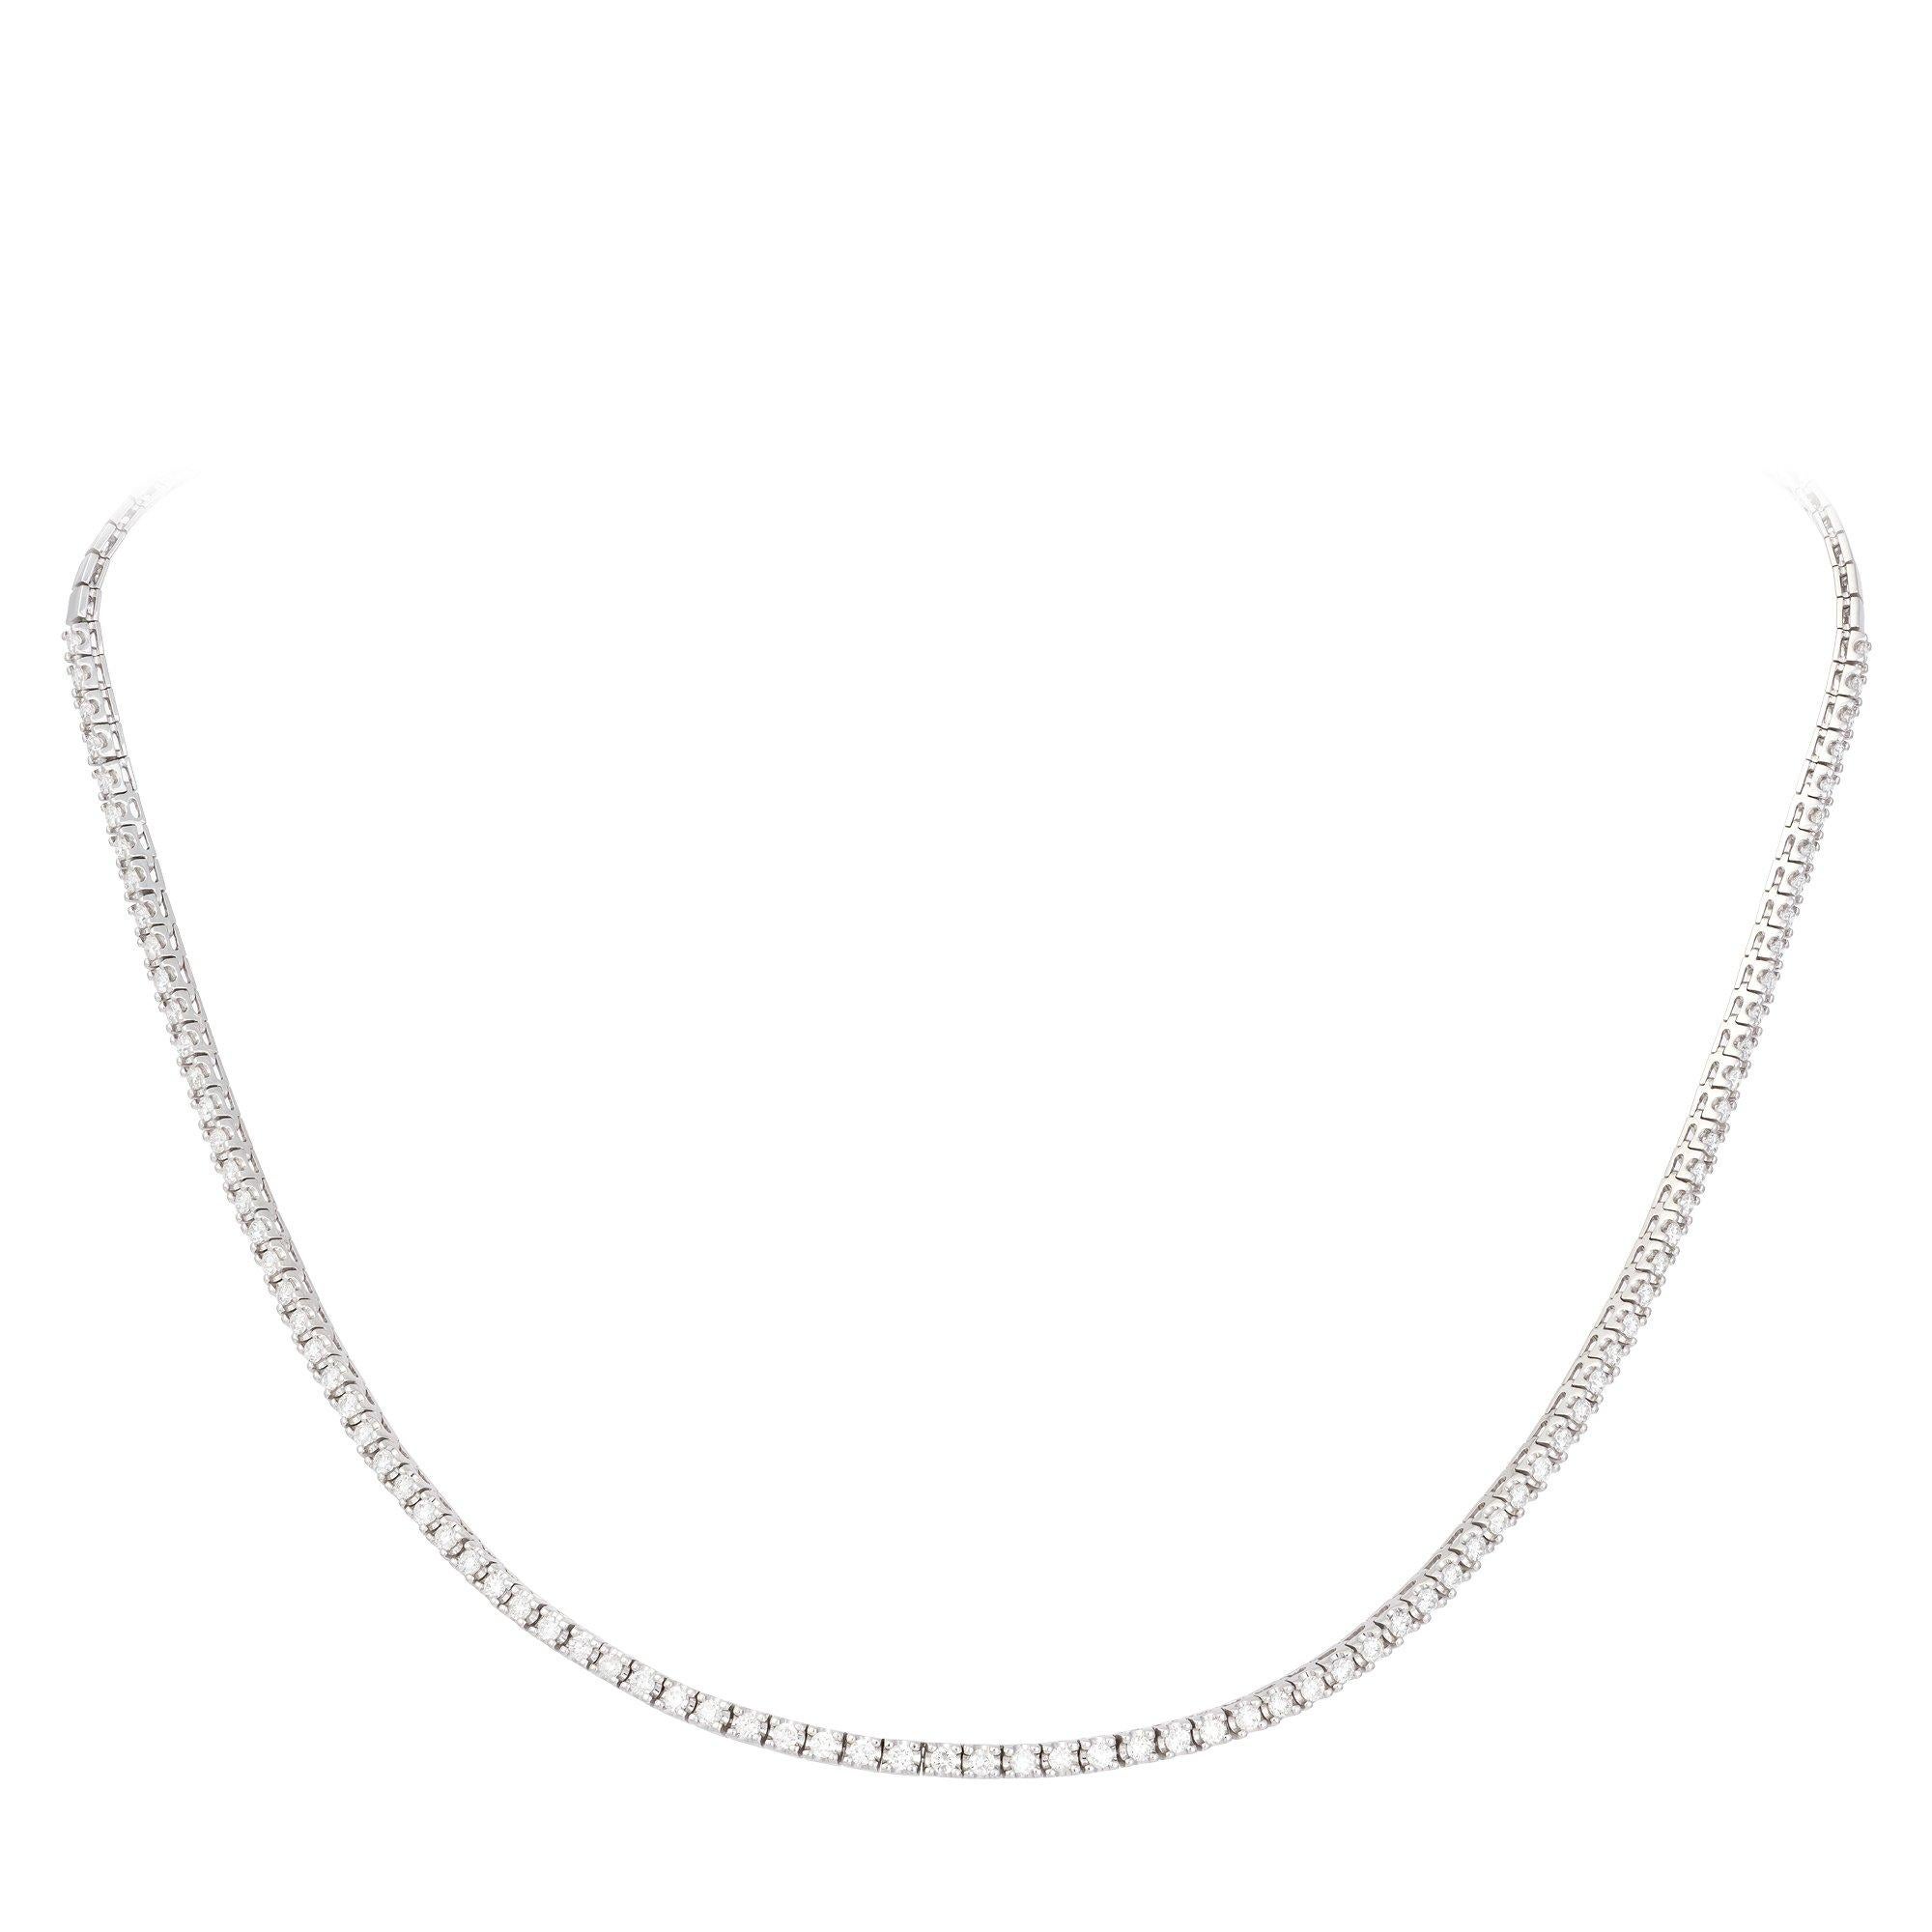 Best Seller Classic Style Diamond NECKLACE 18K White Gold 4.30 Cts/151 Pcs